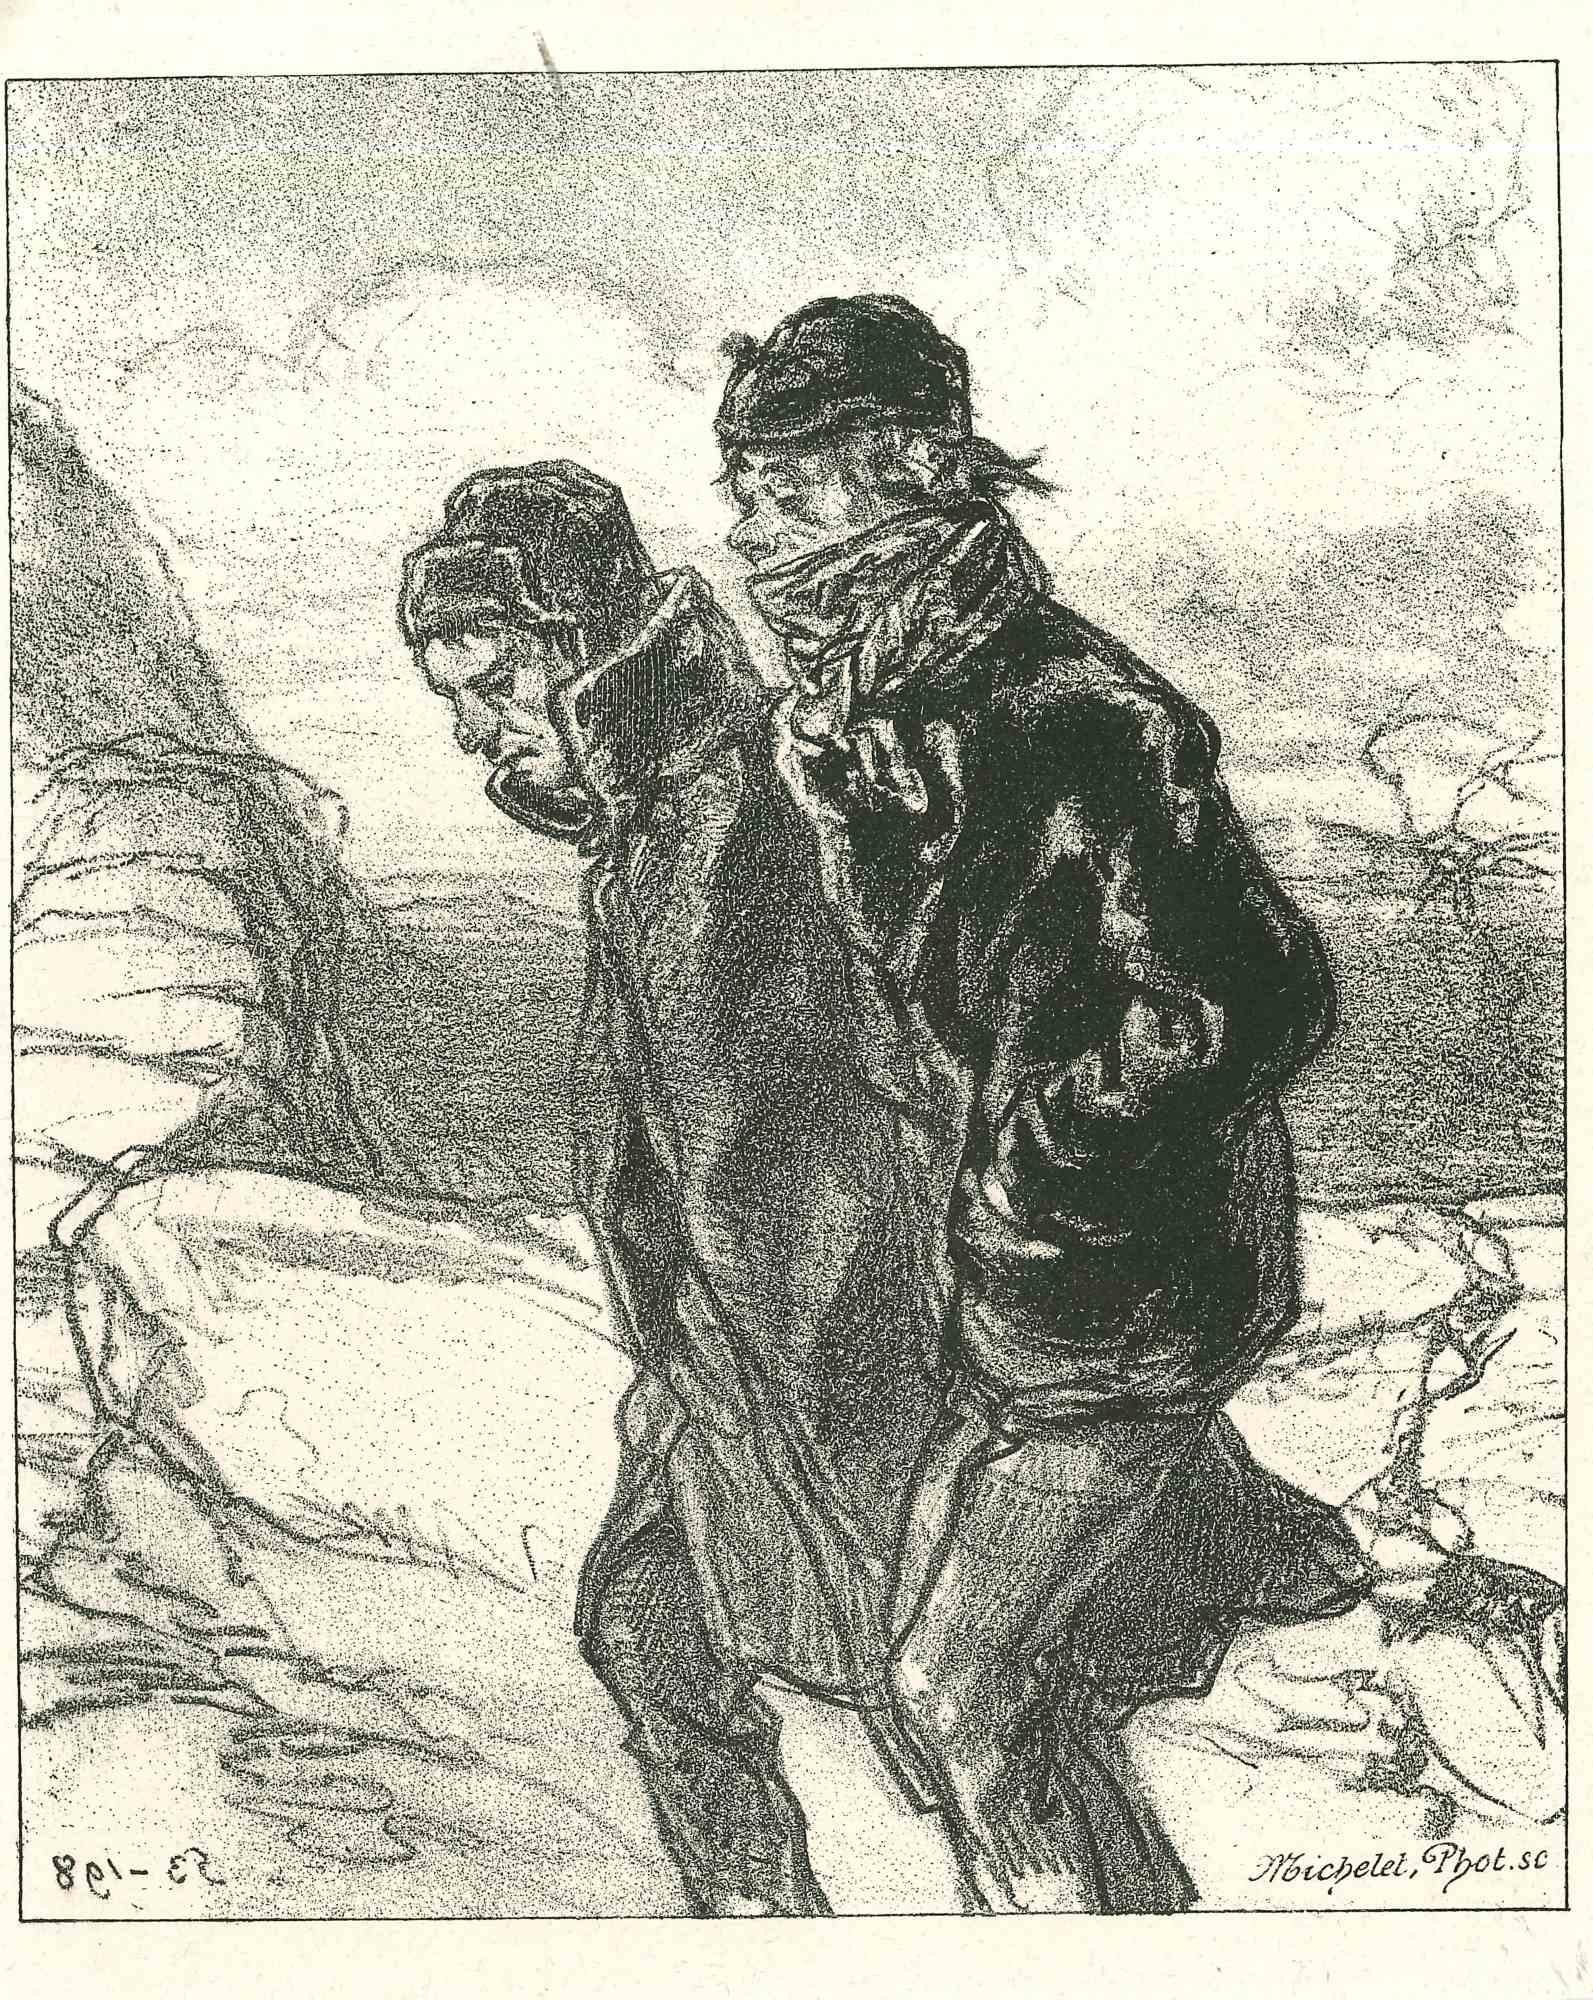 The men in the wind is an original lithograph artwork on ivory-colored paper, realized by the French draftsman Paul Gavarni (after) (alias Guillaume Sulpice Chevalier Gavarni, 1804-1866) in Paris, 1881, in the collection of Illustrations for "La